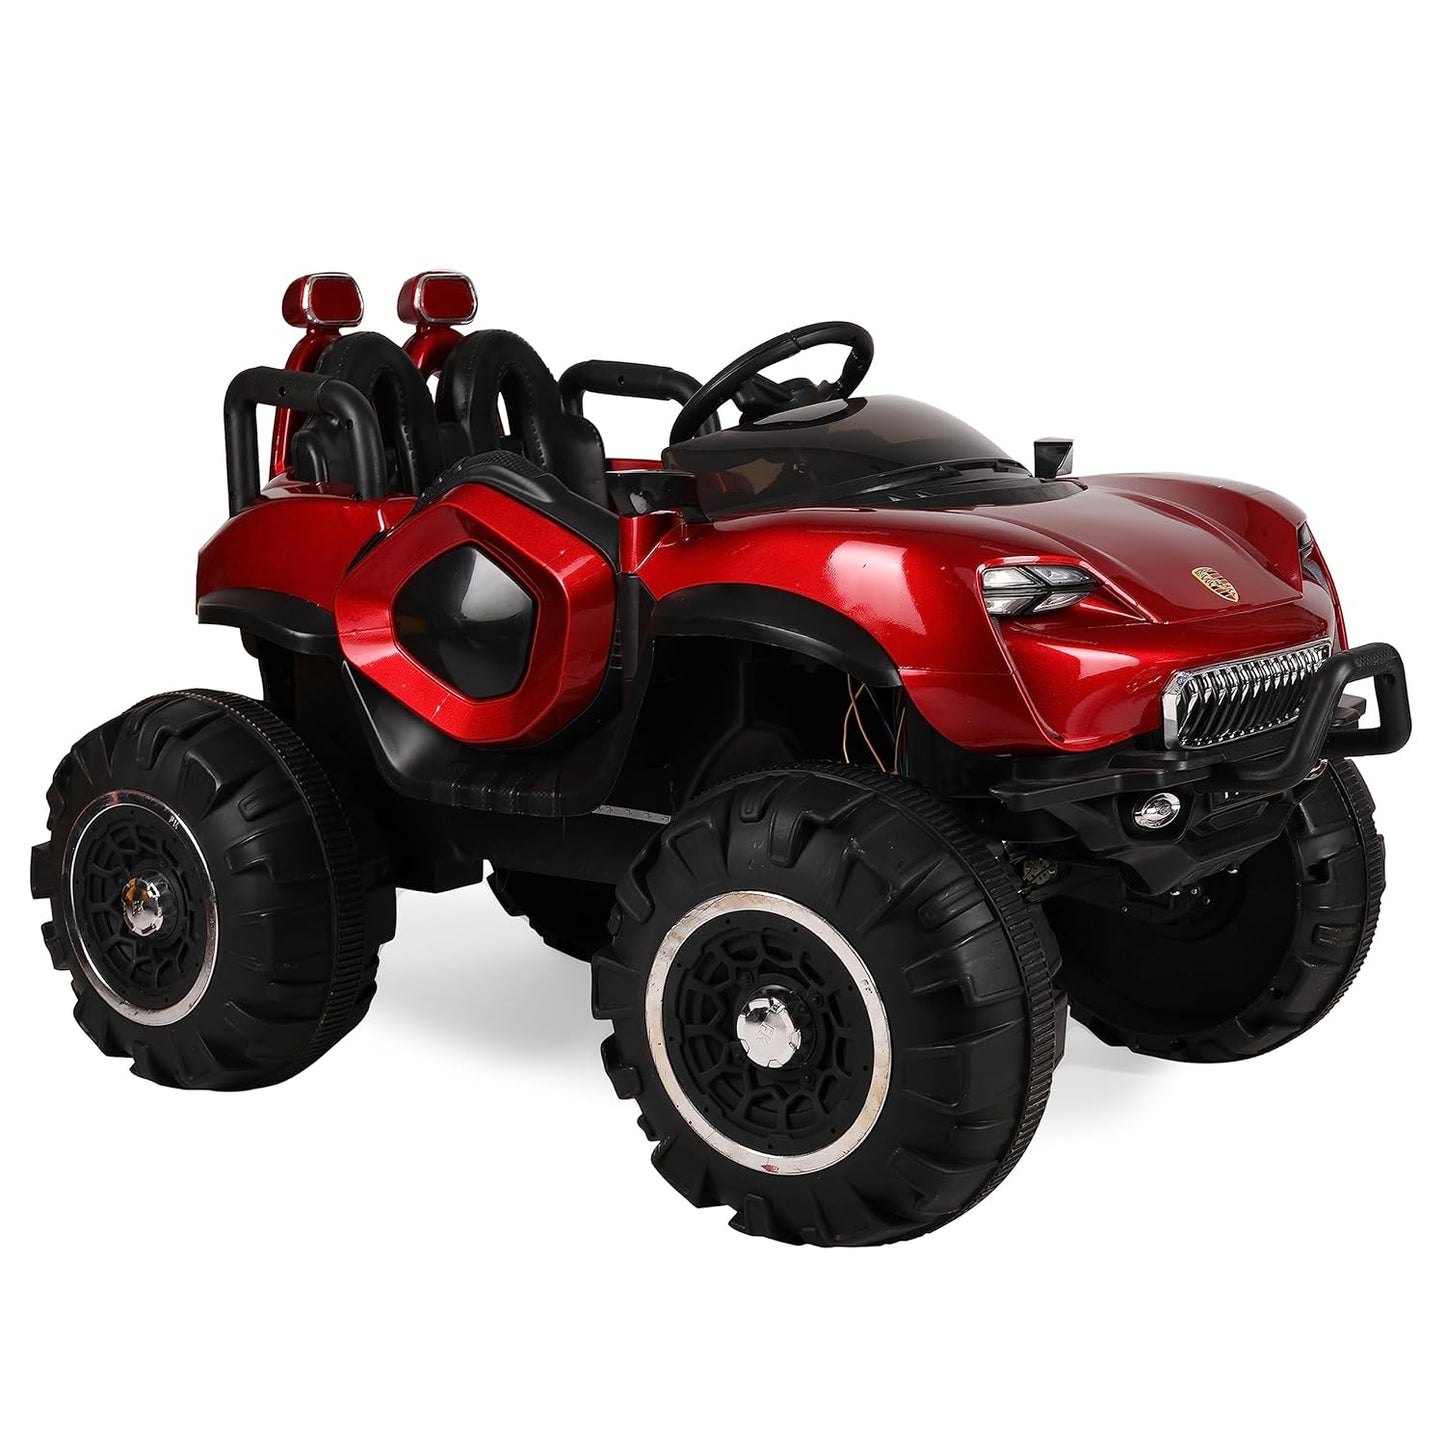 GettBoles 4X4 Electric Rechargeable Jeep for Kids of Age 2 to 7 Years- Battery Operated Car Jeep with Mic, M3 Player, Led Lights, Suspension and Bluetooth Remote (Red)